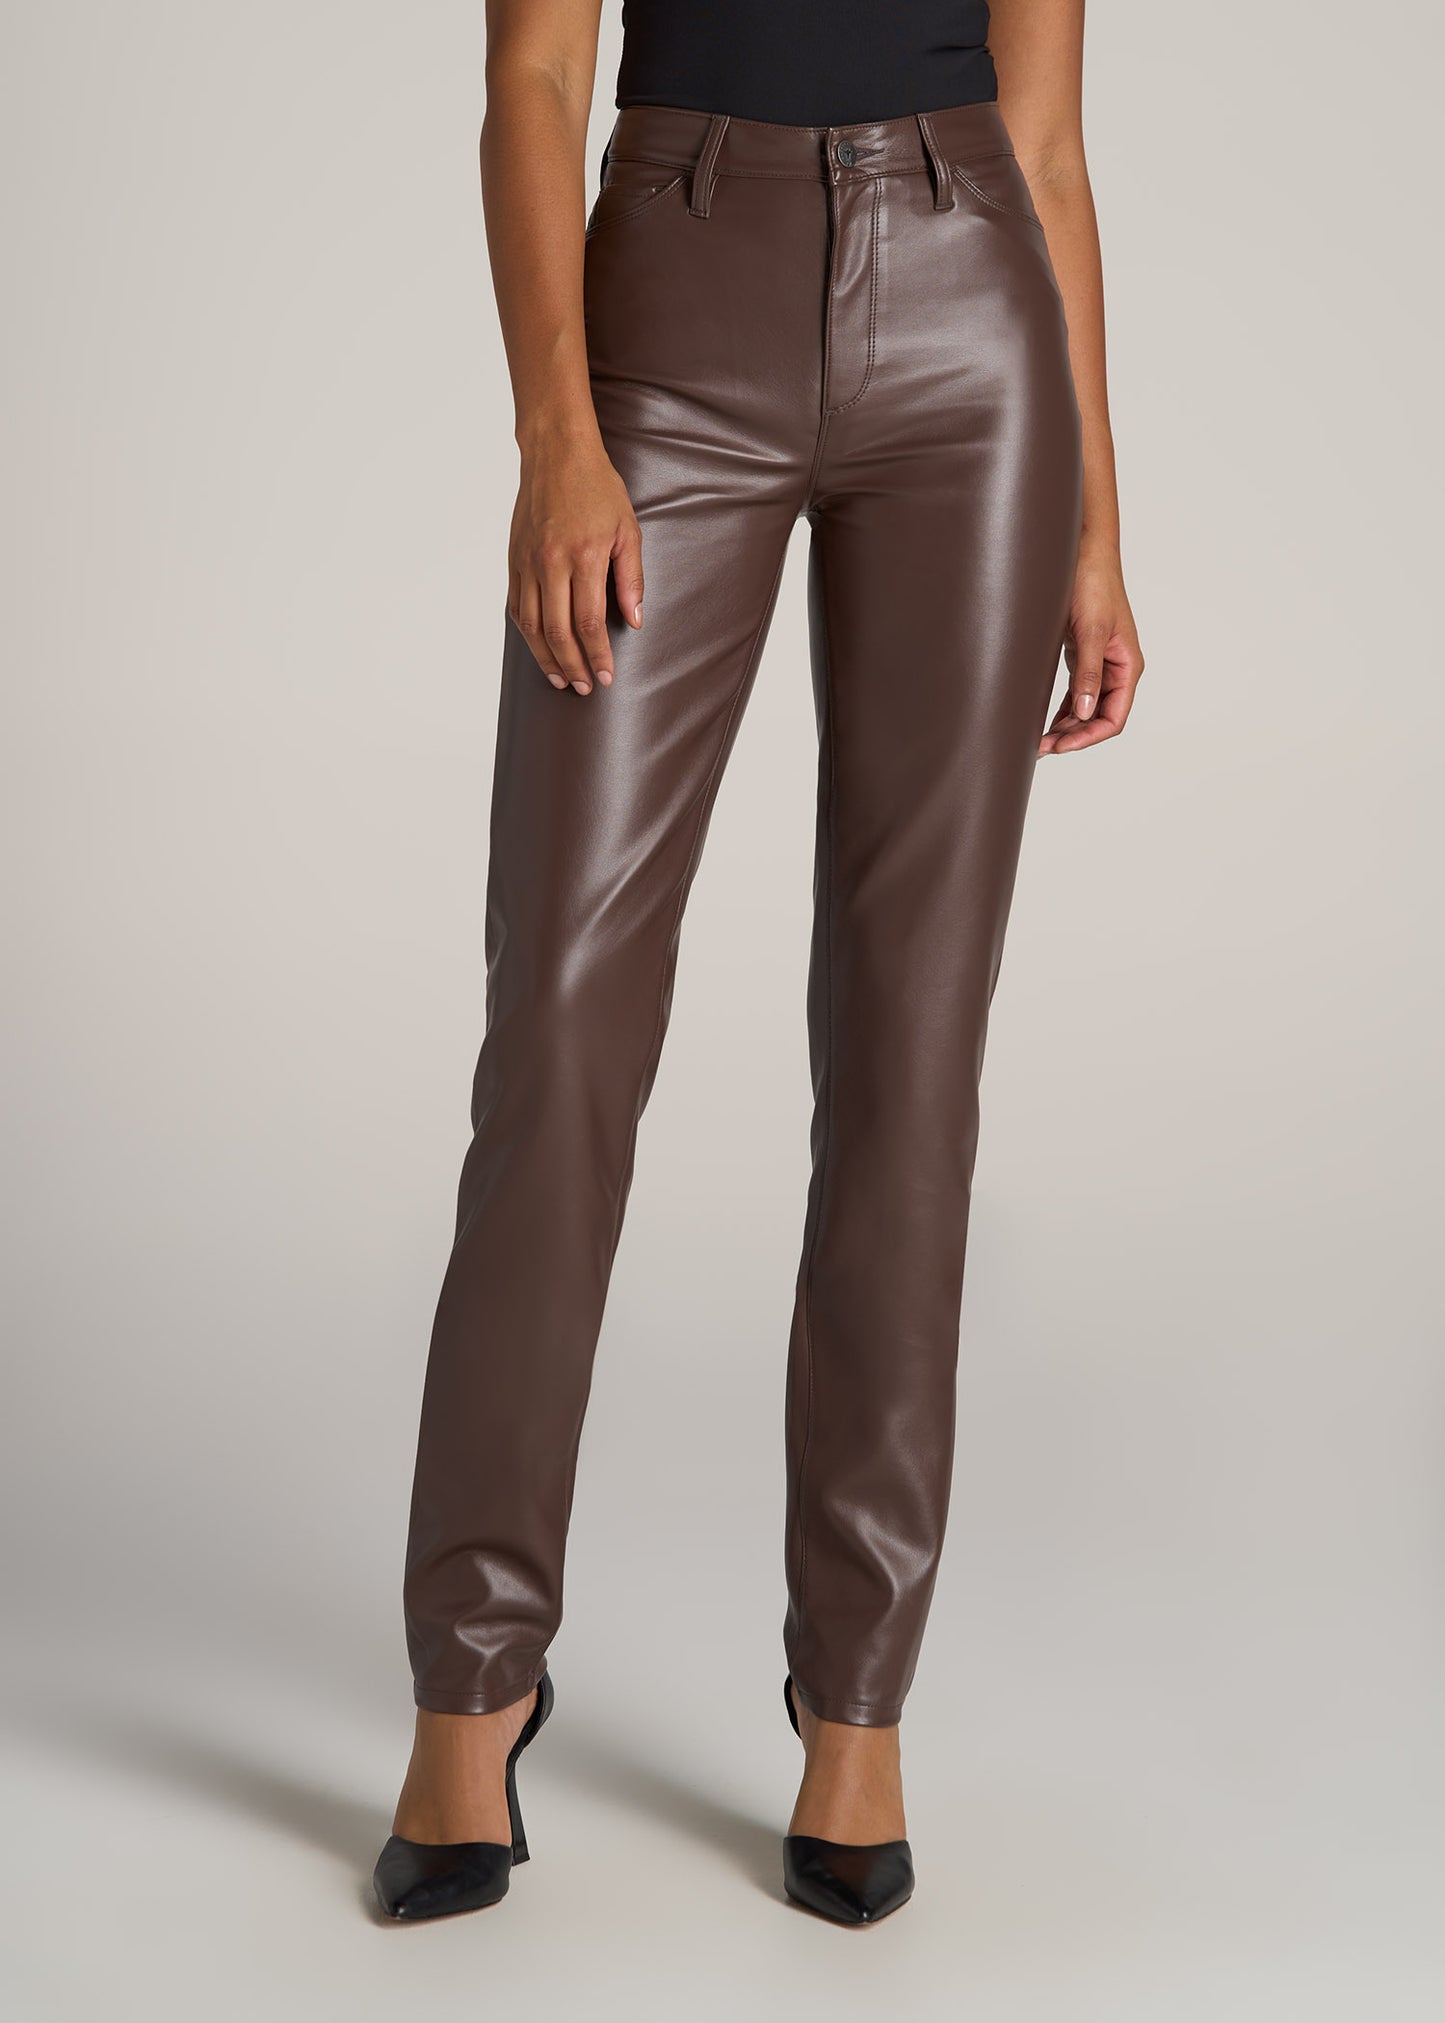 New A New Day Faux Leather Pants Size 14